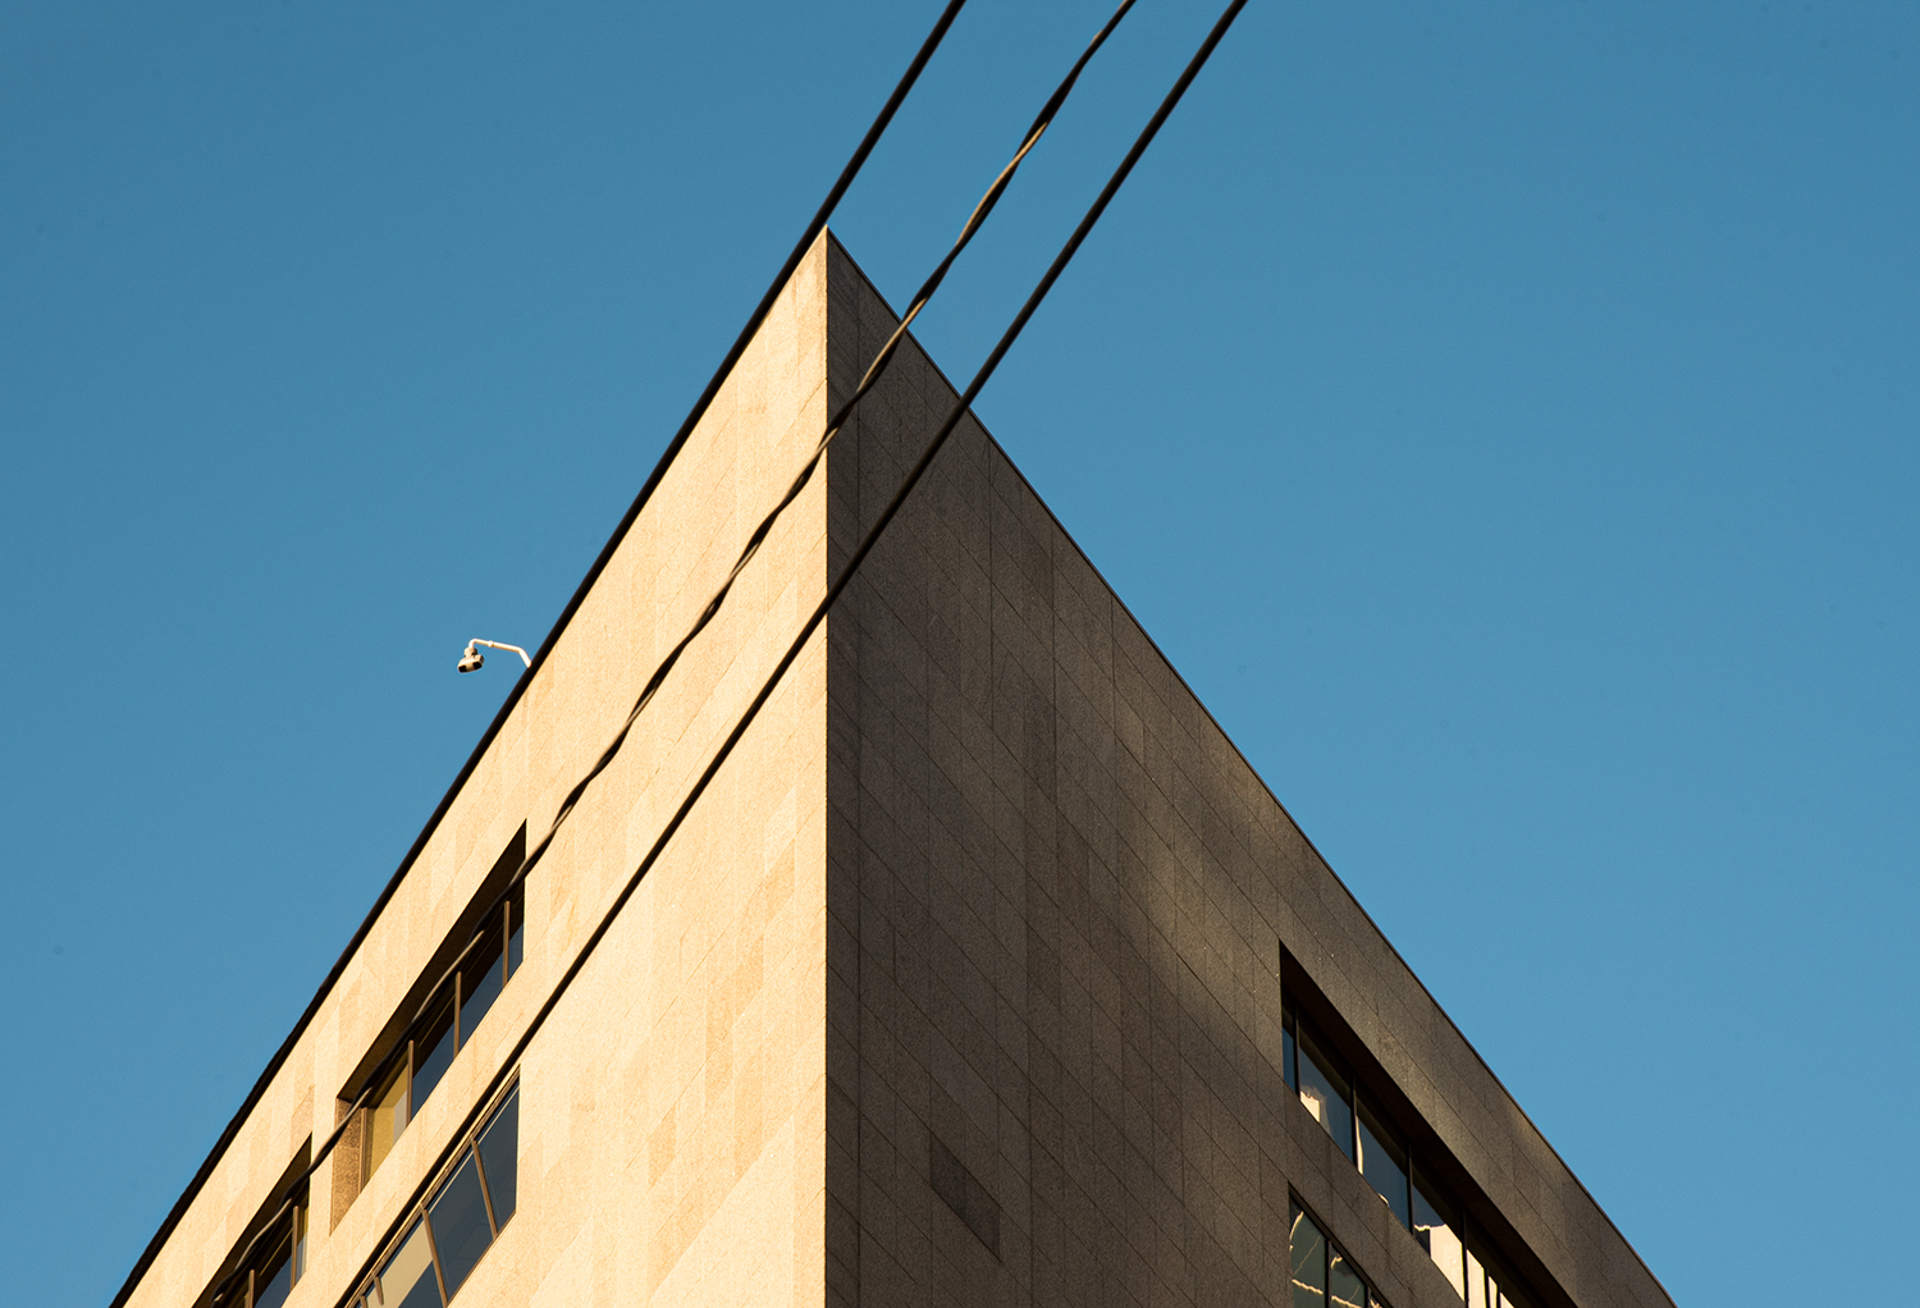 A photo looking up at a corner of a building, three power lines align with the corner of the building diagonally across the image. The sky is a bright blue that matches well with the beige exterior of the building.